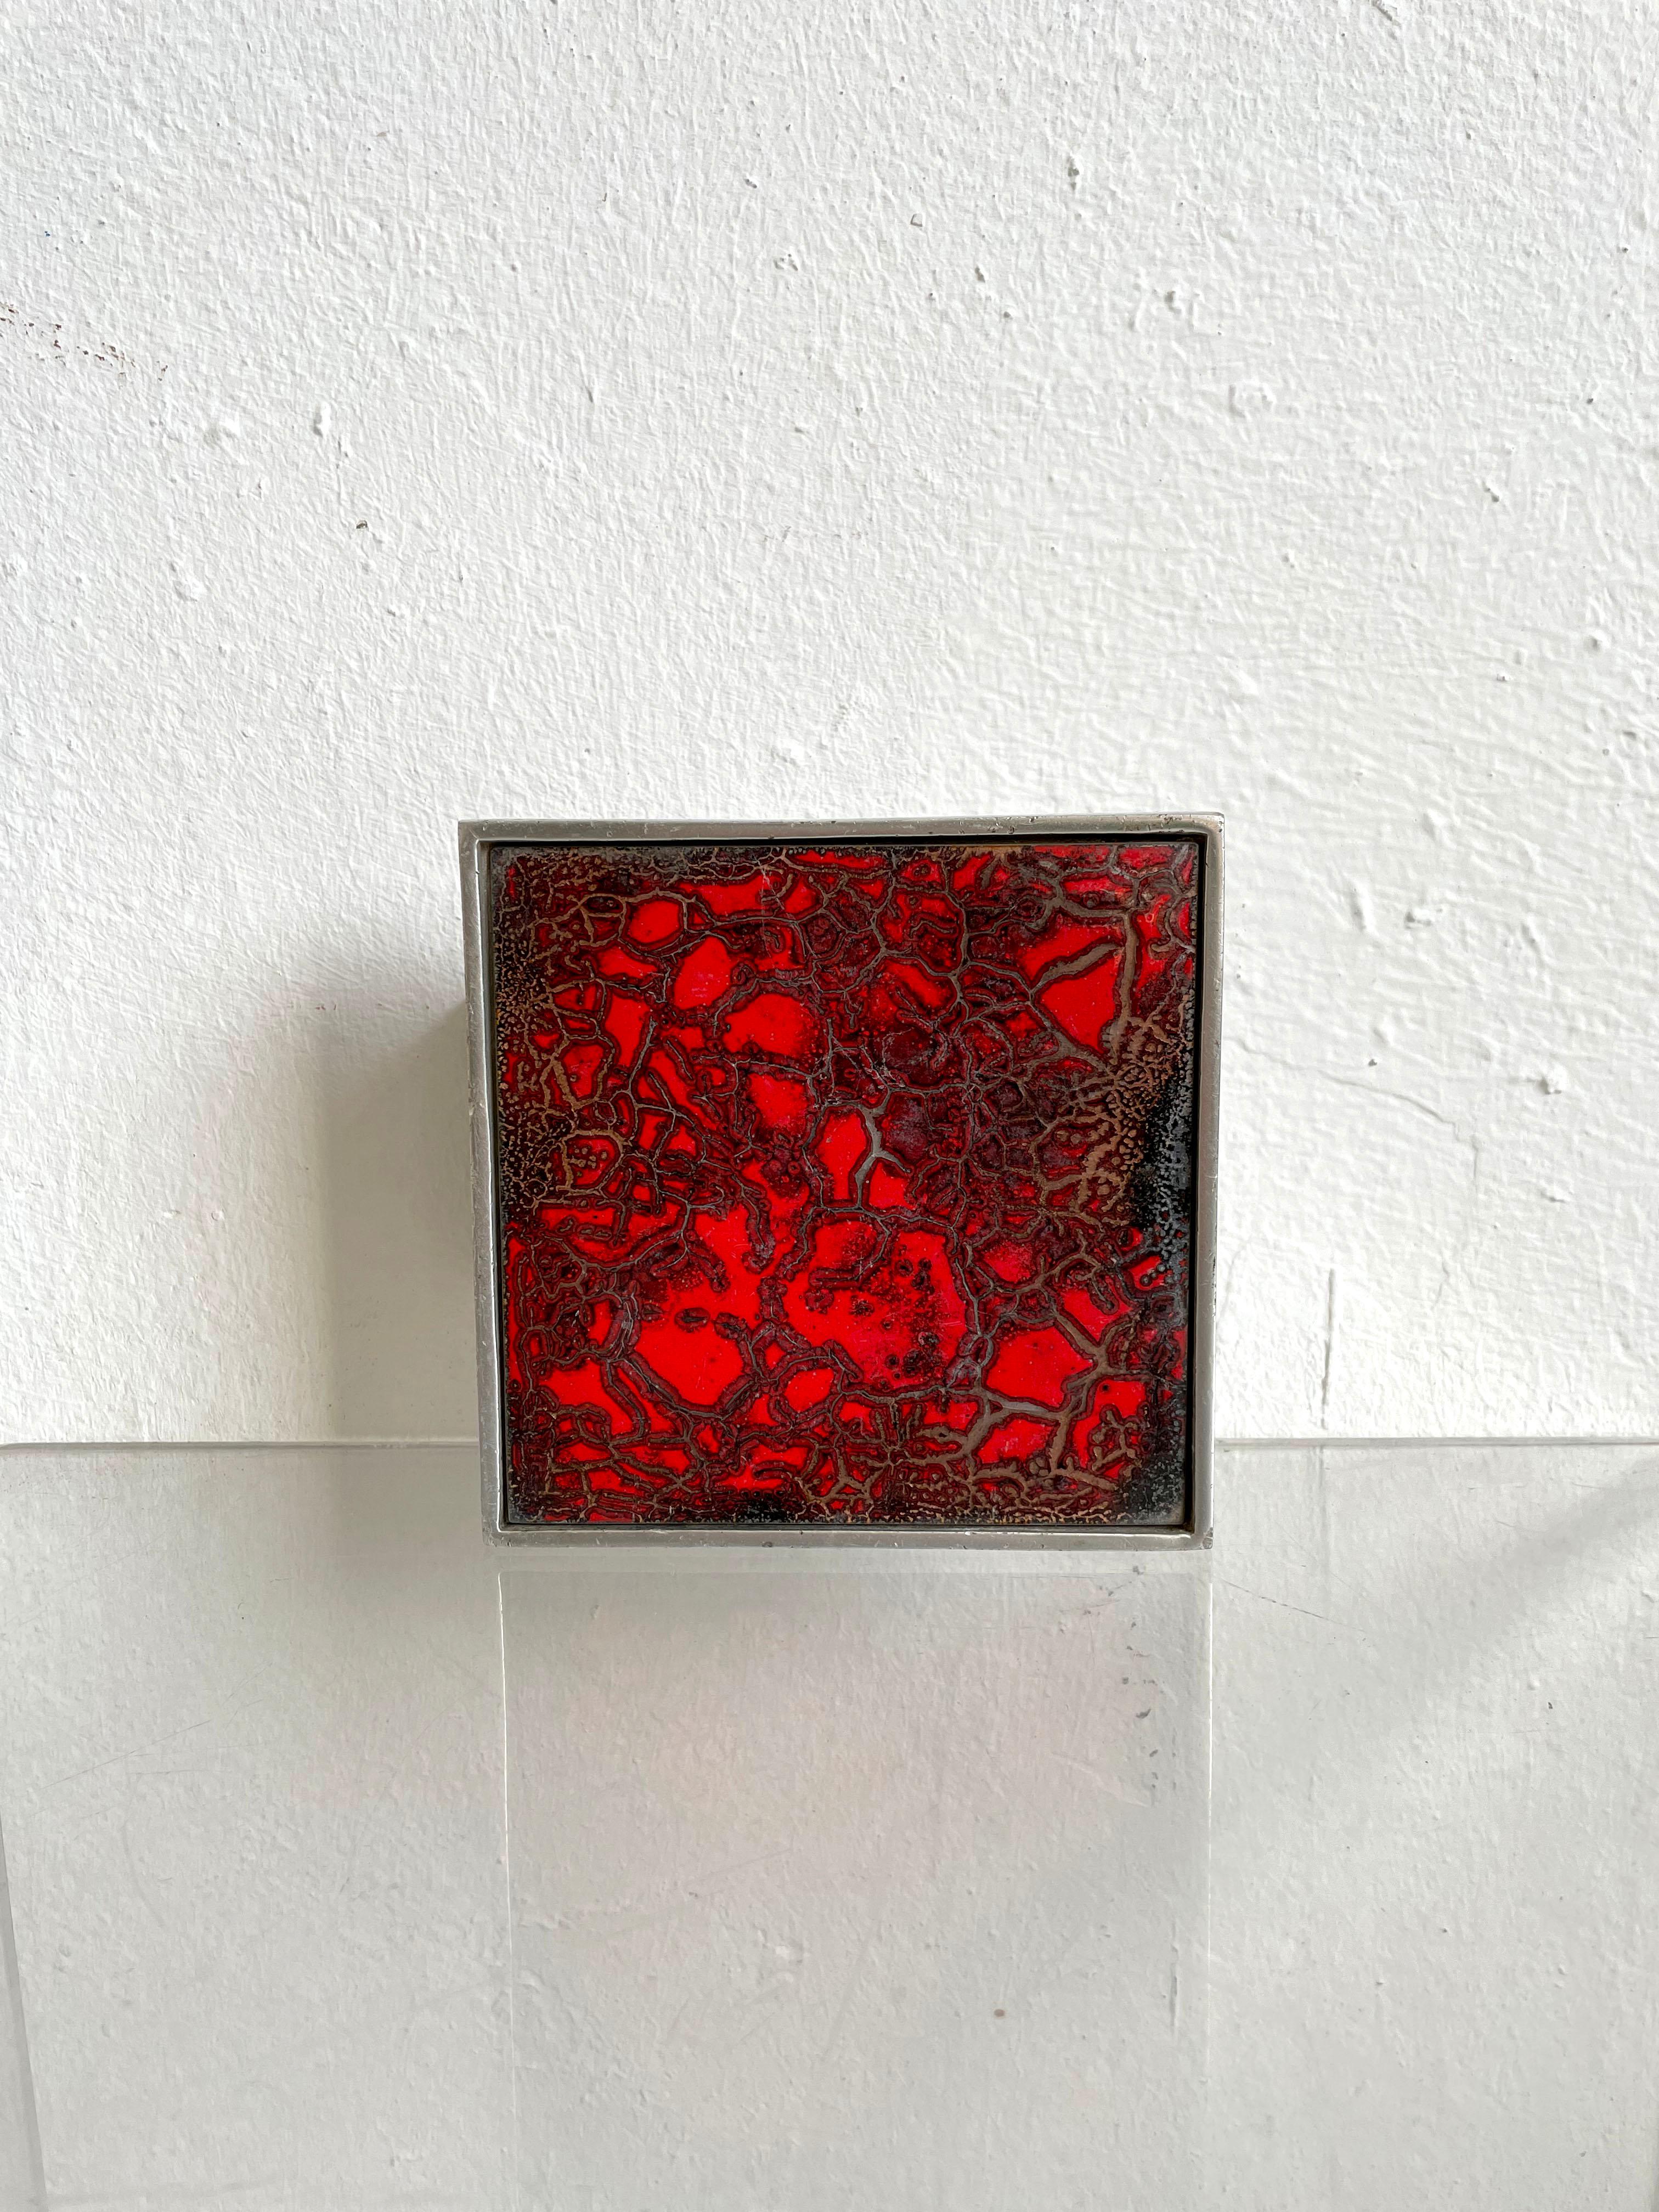 Vintage Belgian architectural aluminium and glazed ceramic door pull from the 1960s

Abstract mid century design

In the style of Belgian ceramic tile artist Juliette Belarti

Beautiful bright colours, handcrafted ceramic door handle,